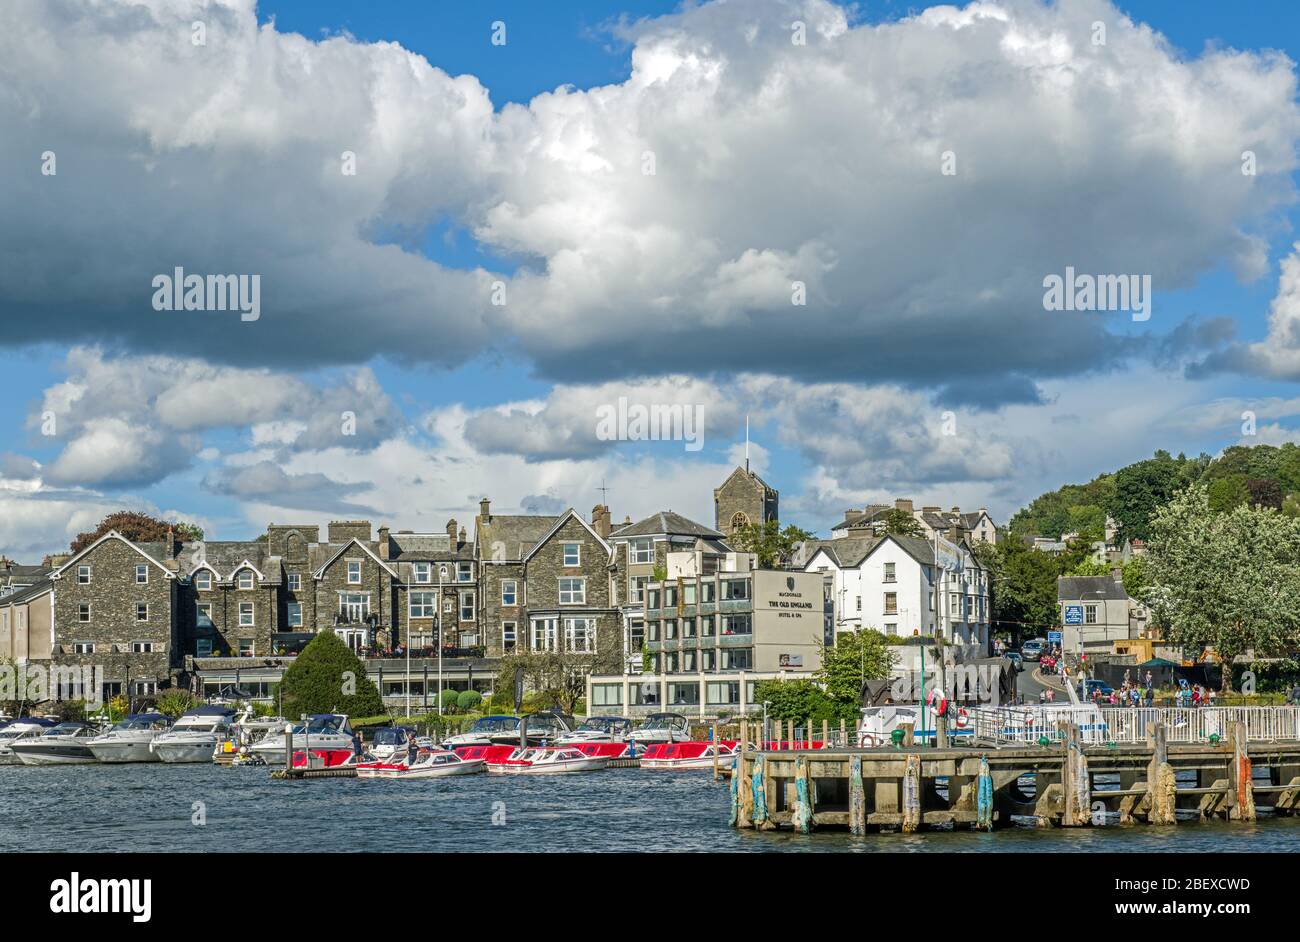 Bowness on Windermere on the Windermere shoreline. This is the HQ for the Windermere Lake Cruises and the Old England Hotel. Popular with tourists. Stock Photo